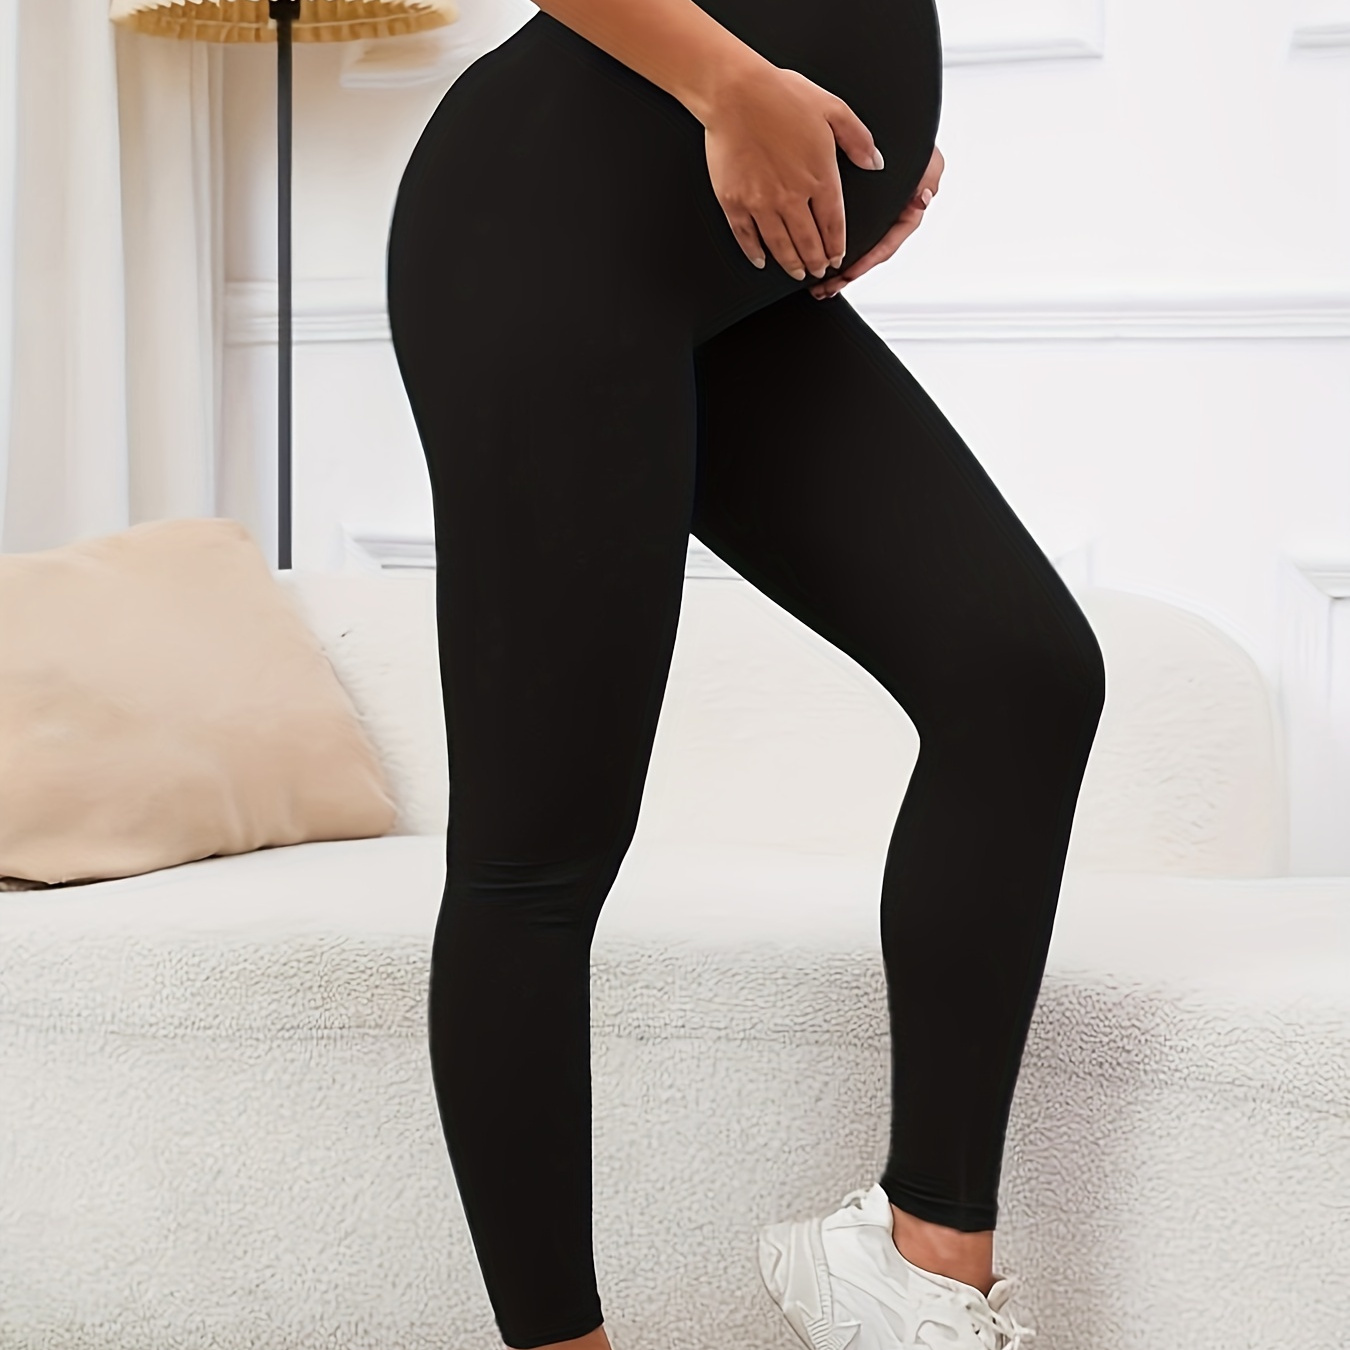 

Comfortable Maternity Leggings, Elastic High Waist, Belly Support, Sport Style, Pregnancy Activewear Fitness Trousers